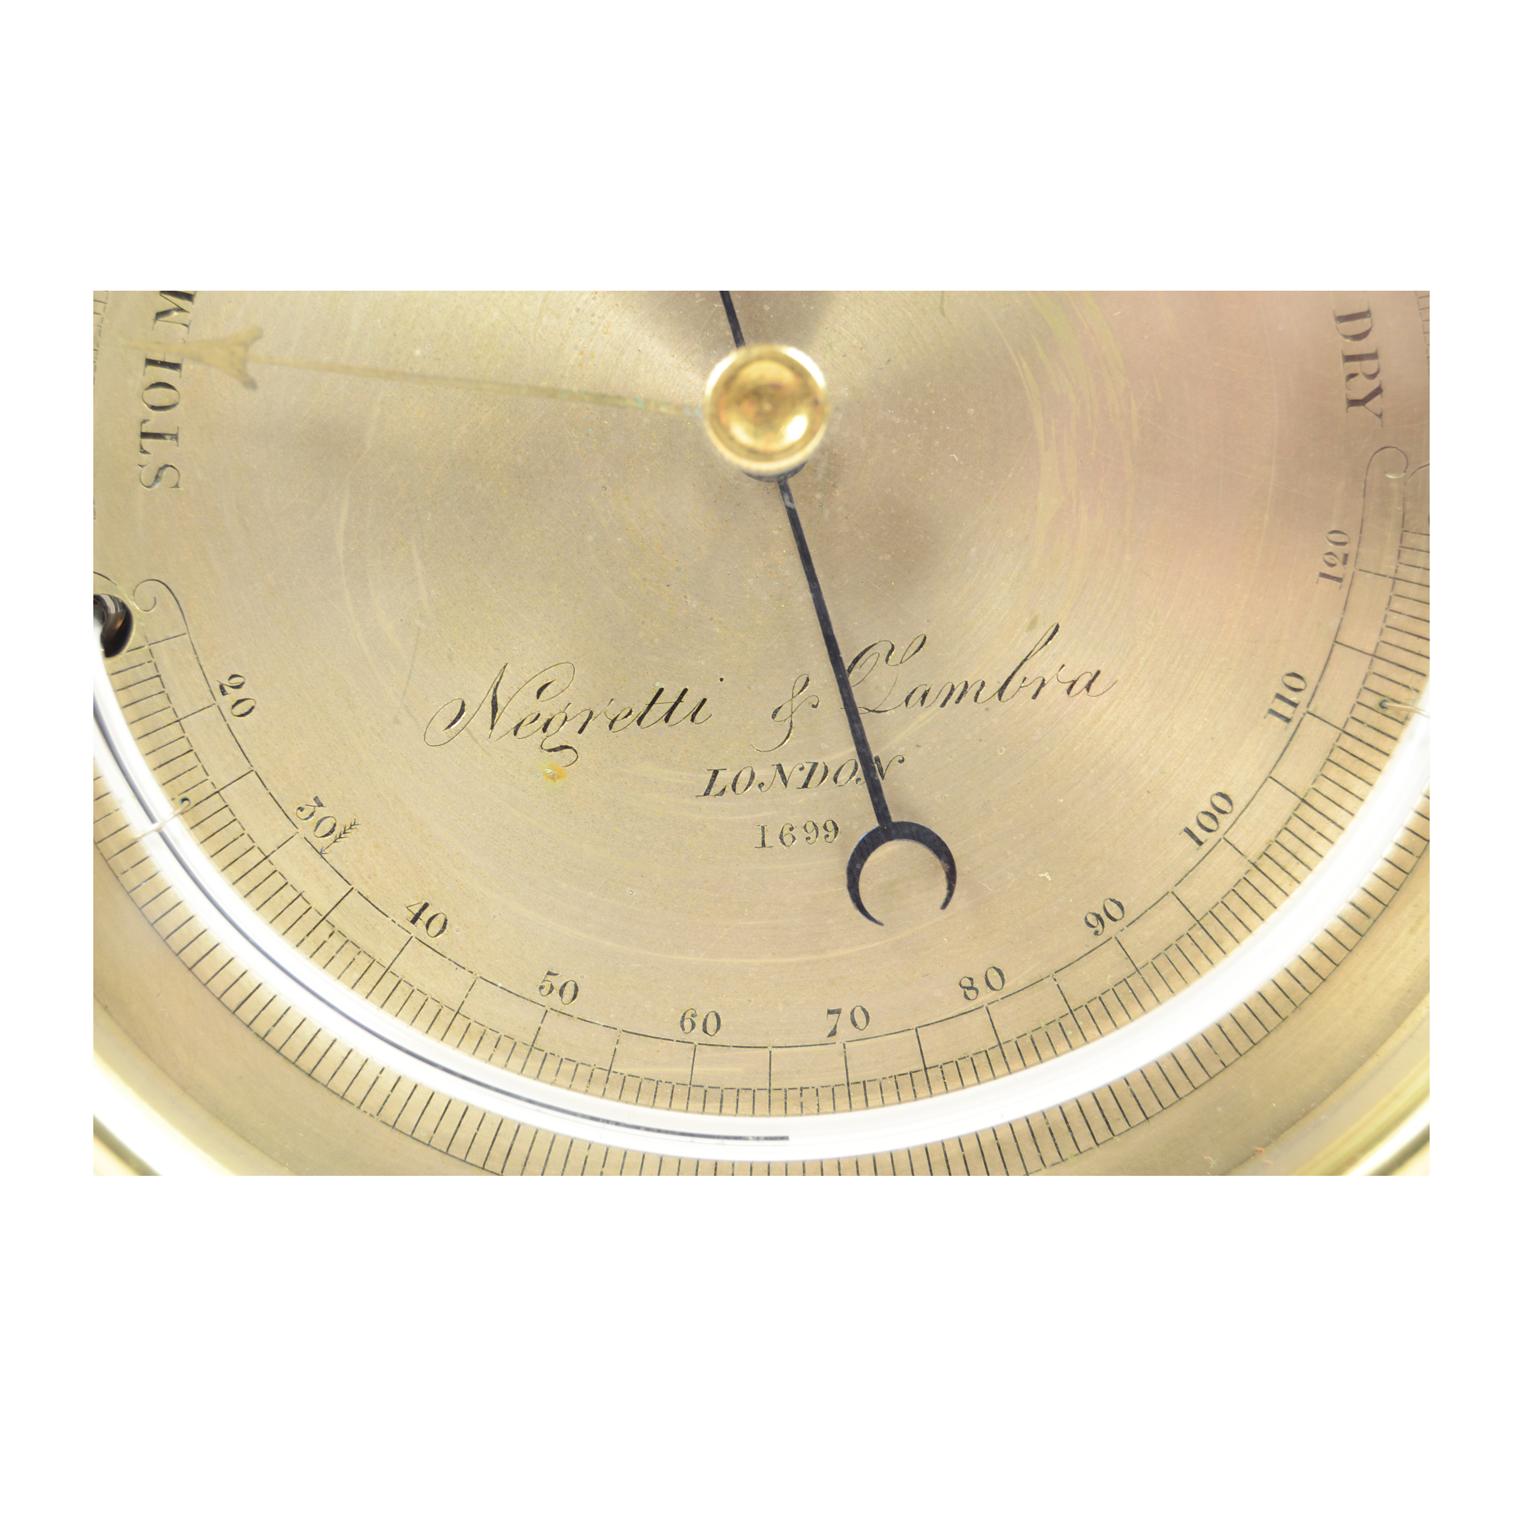 Aneroid or holosteric brass barometer made at the end of the 19th century, signed Negretti & Zambra n. I 699, complete with semicircle thermometer with engraved and silver-plated brass temperature scale calibrated from 20 ° to 120 ° degrees